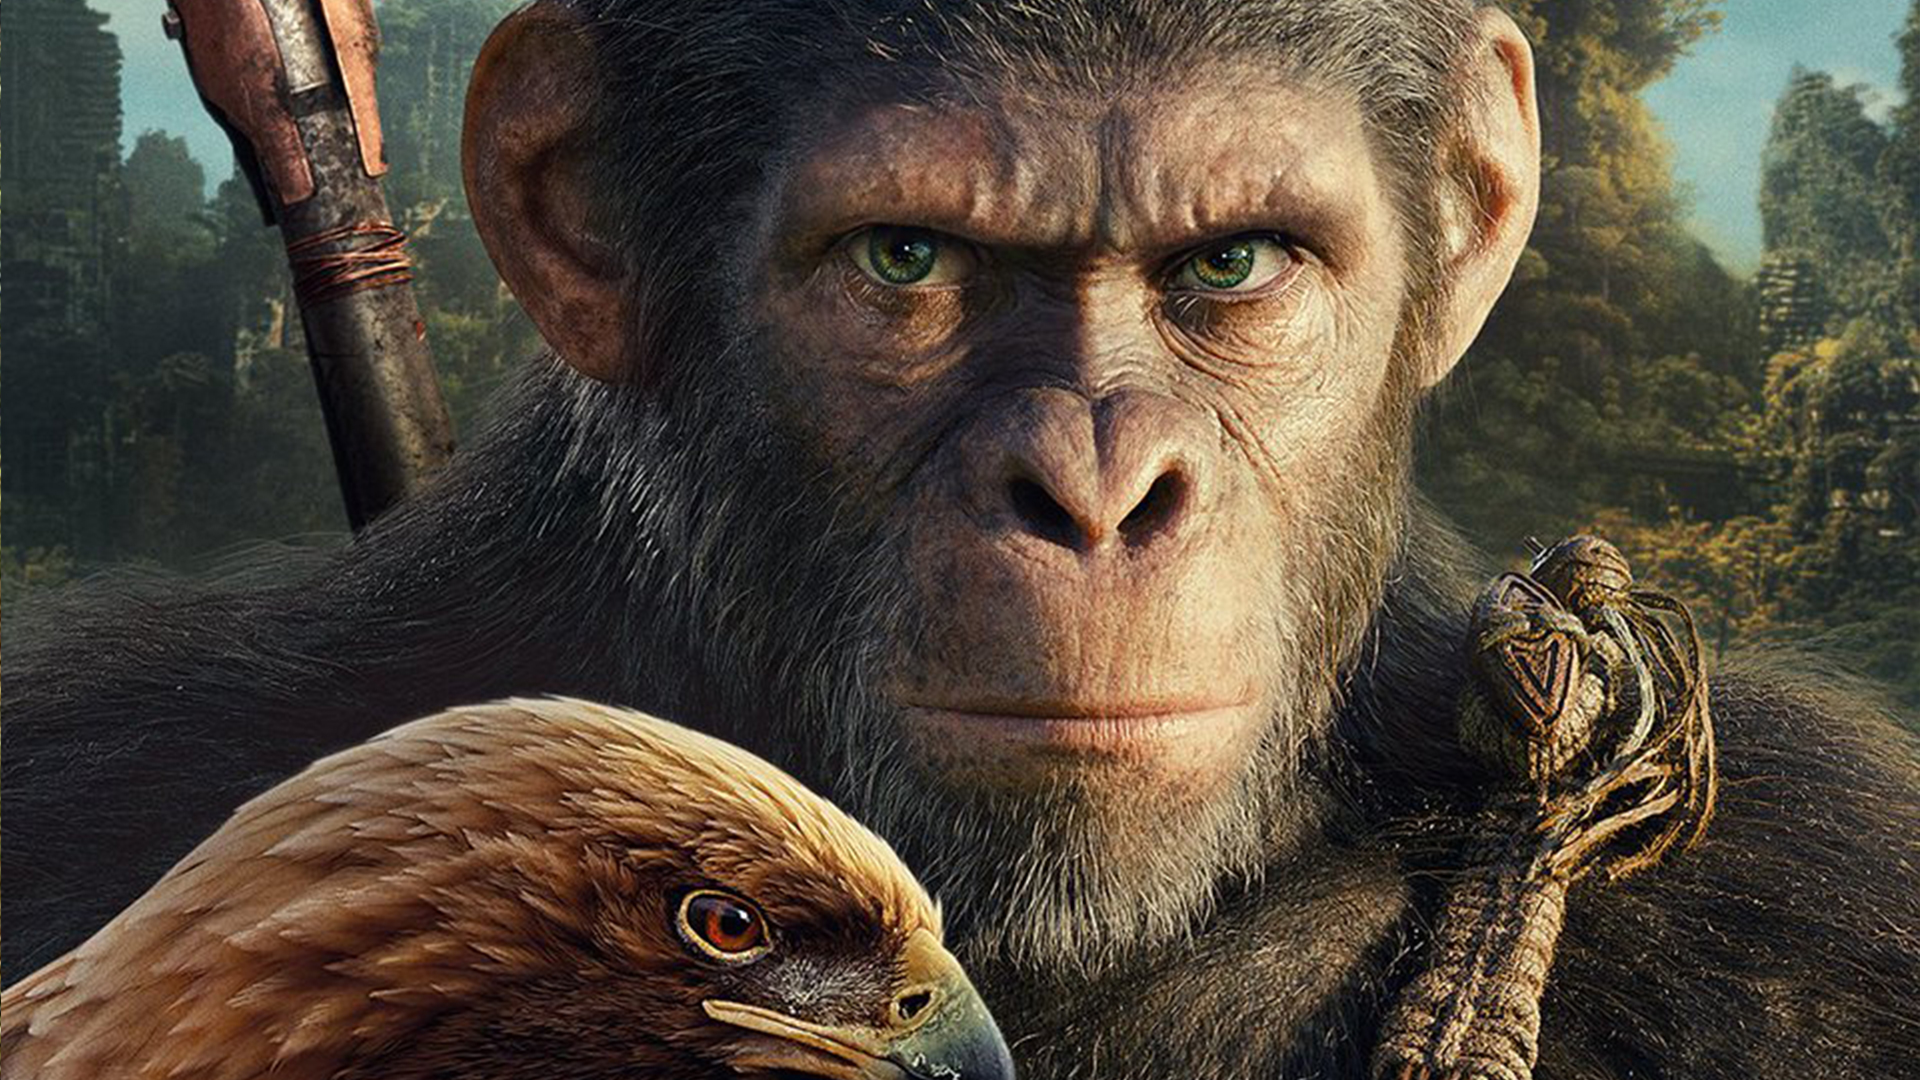 Kingdom of the Planet of the Apes' Super Bowl trailer promises a fiery ...